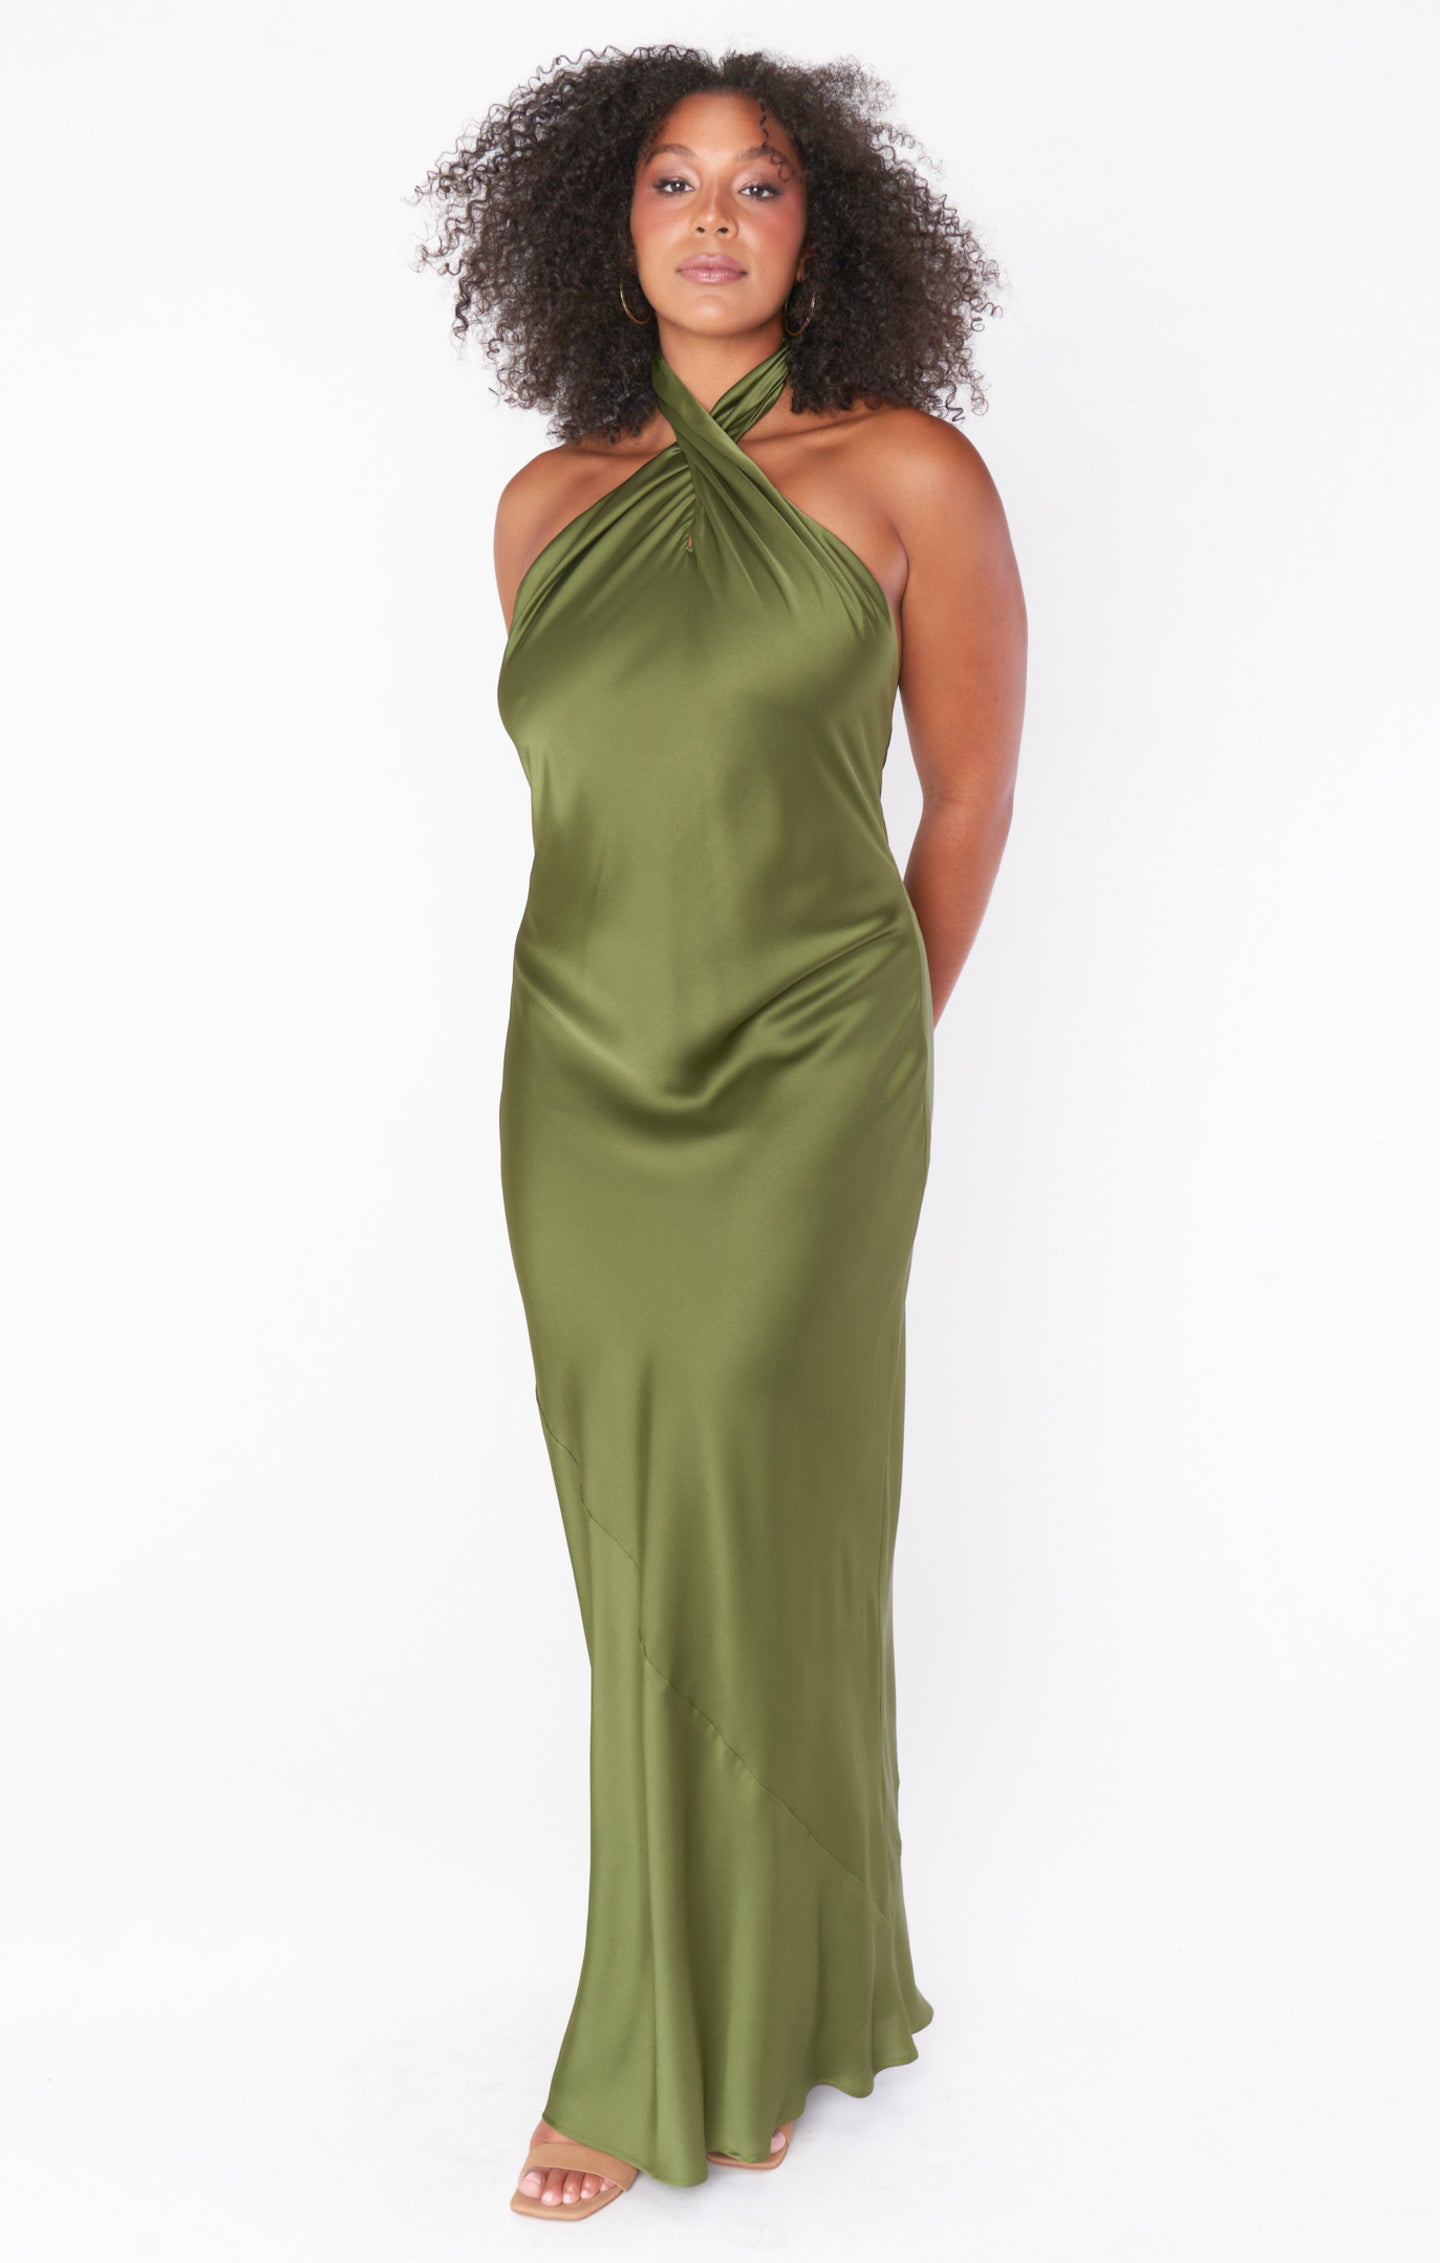 Lace Up Tie-back Corset Maxi Bridesmaid Dress With Front Slit In Olive Green